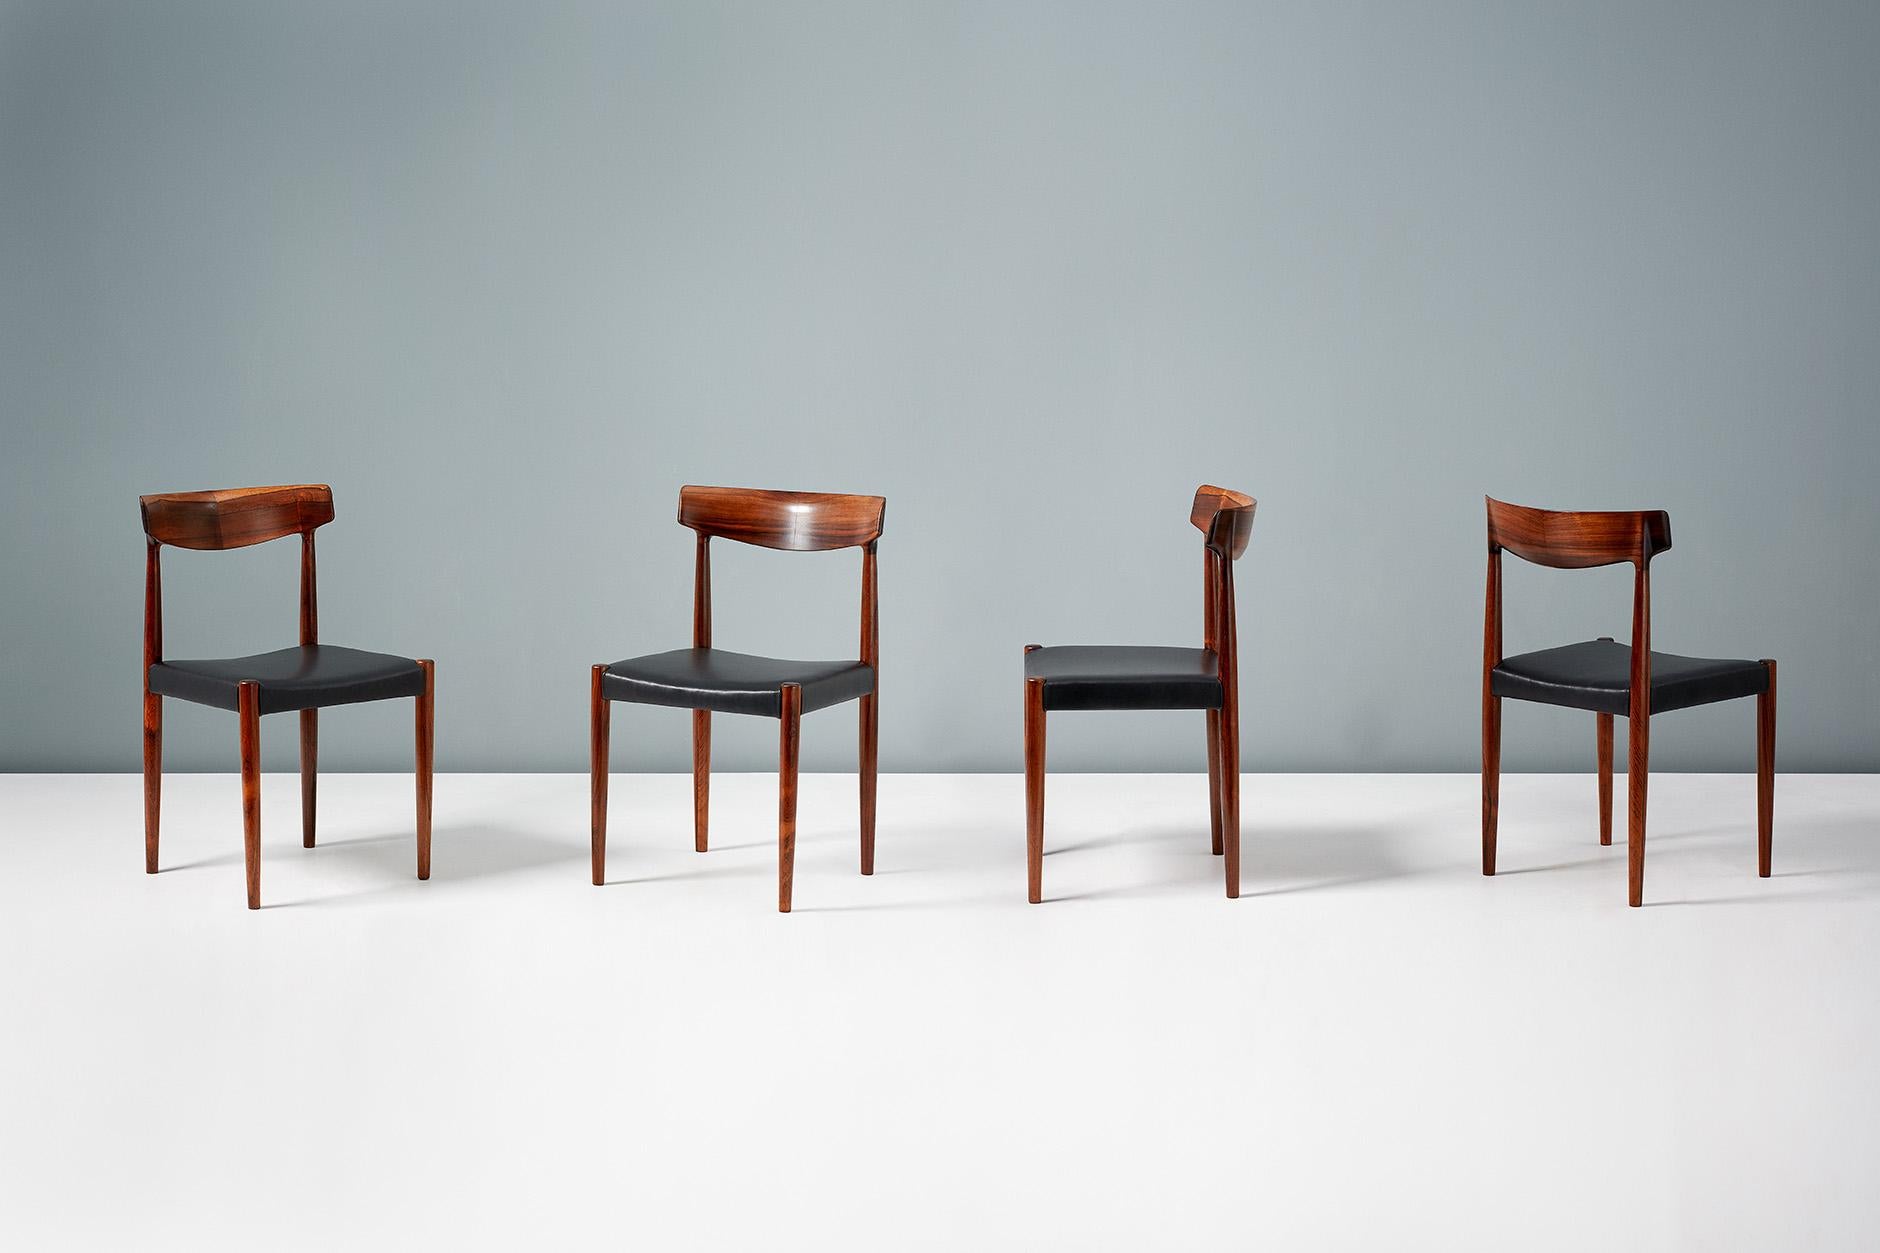 Knud Faerch

Model 343 dining chairs, circa 1950s

Rarely seen set of eight model 343 dining chairs designed by Knud Færch & produced by Slagelse Møbelfabrik in Denmark in the 1950s. The frames are made from exquisite Brazilian Rosewood with